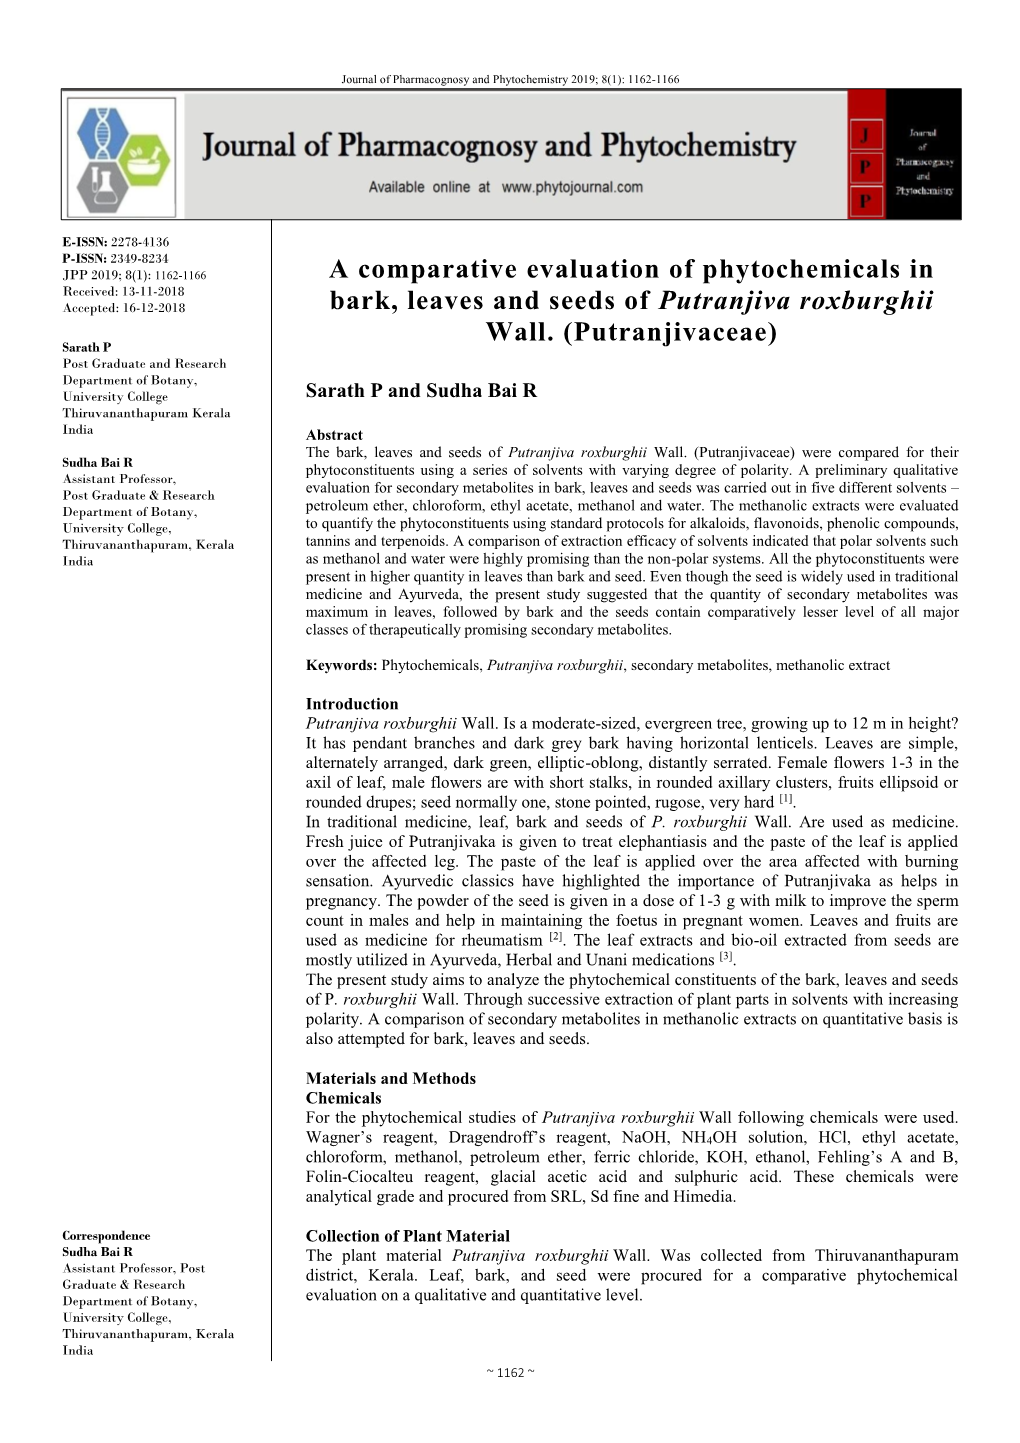 A Comparative Evaluation of Phytochemicals in Bark, Leaves And